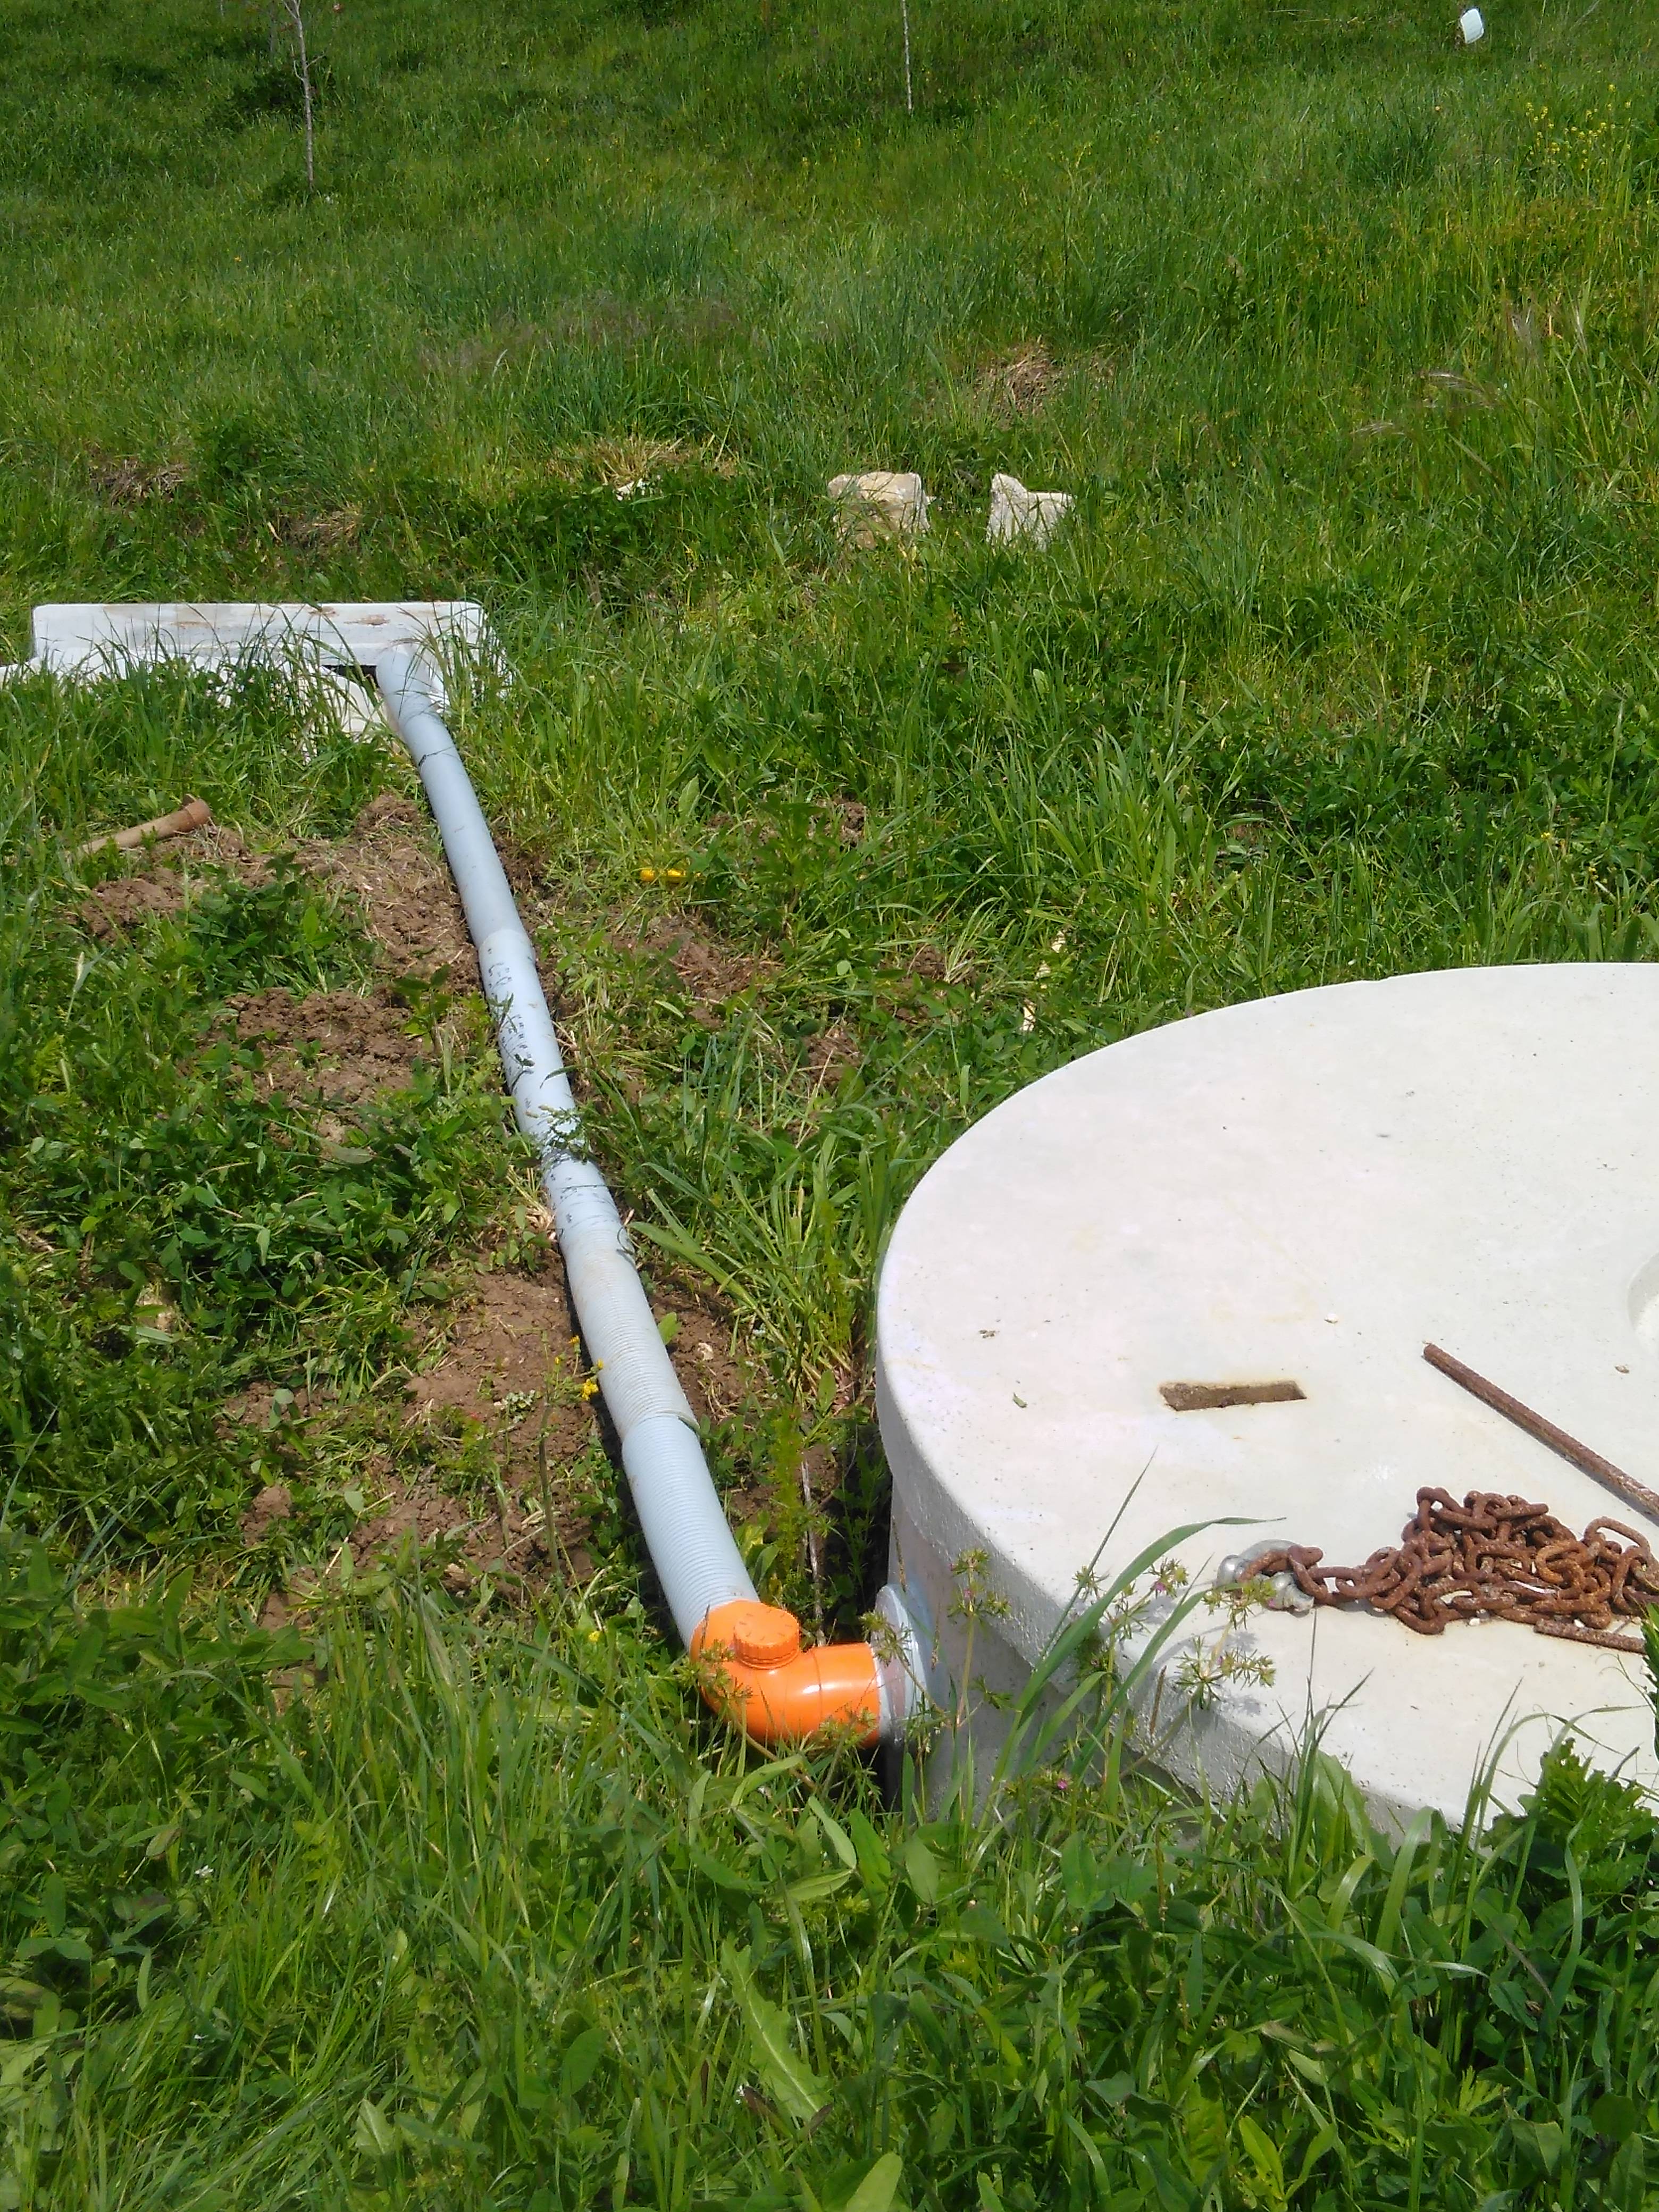 toxicity evaluation of septic tank overflow water